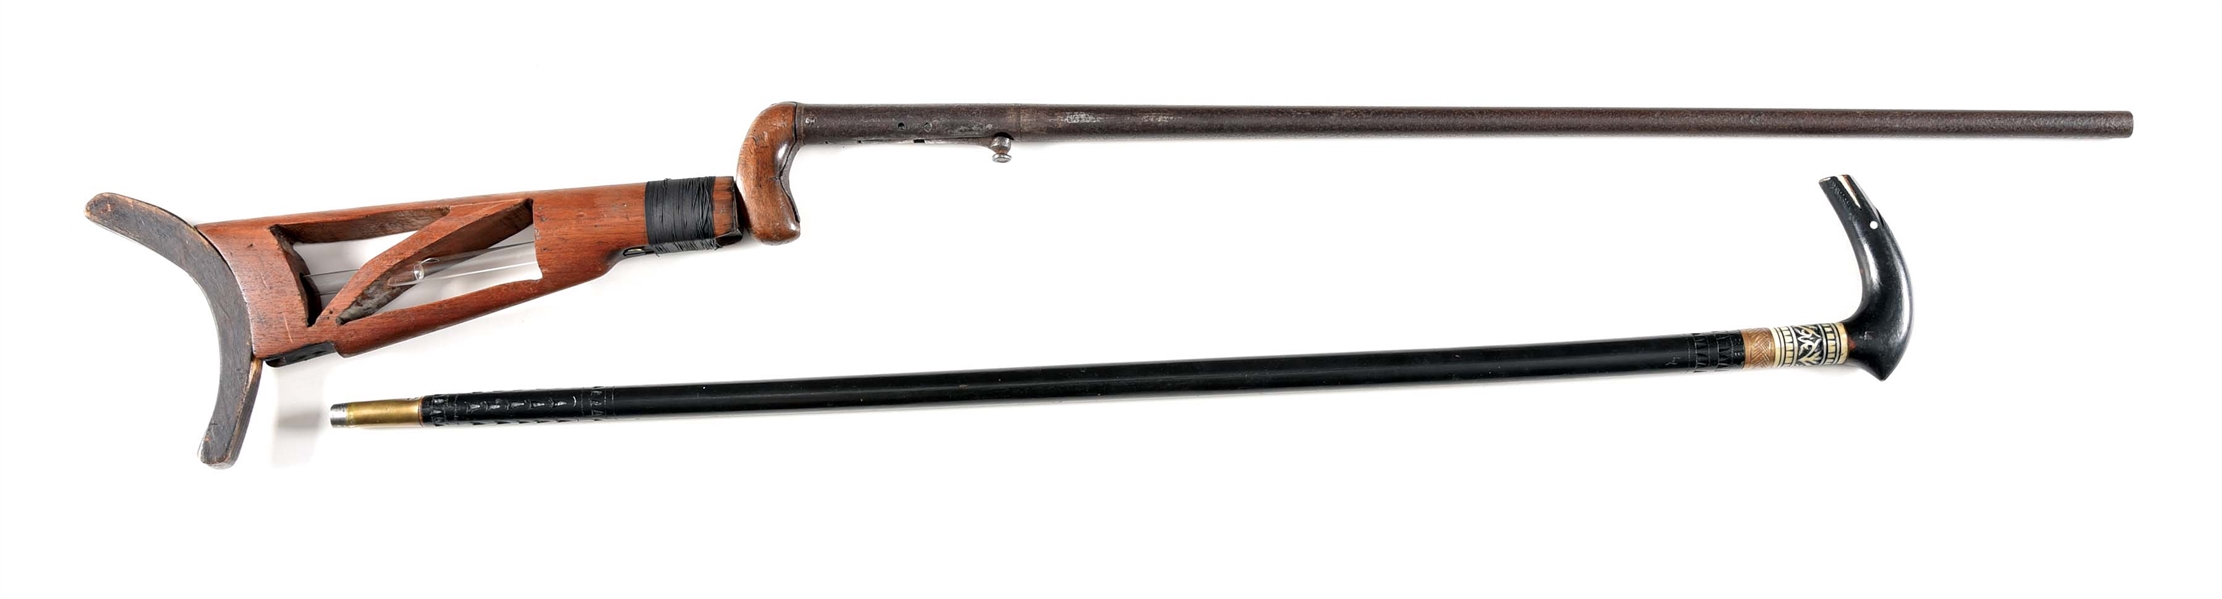 (A) LOT OF 2: DAYS PATENT UNDERHAMMER PERCUSSION CANE GUN AND CANE SWORD.